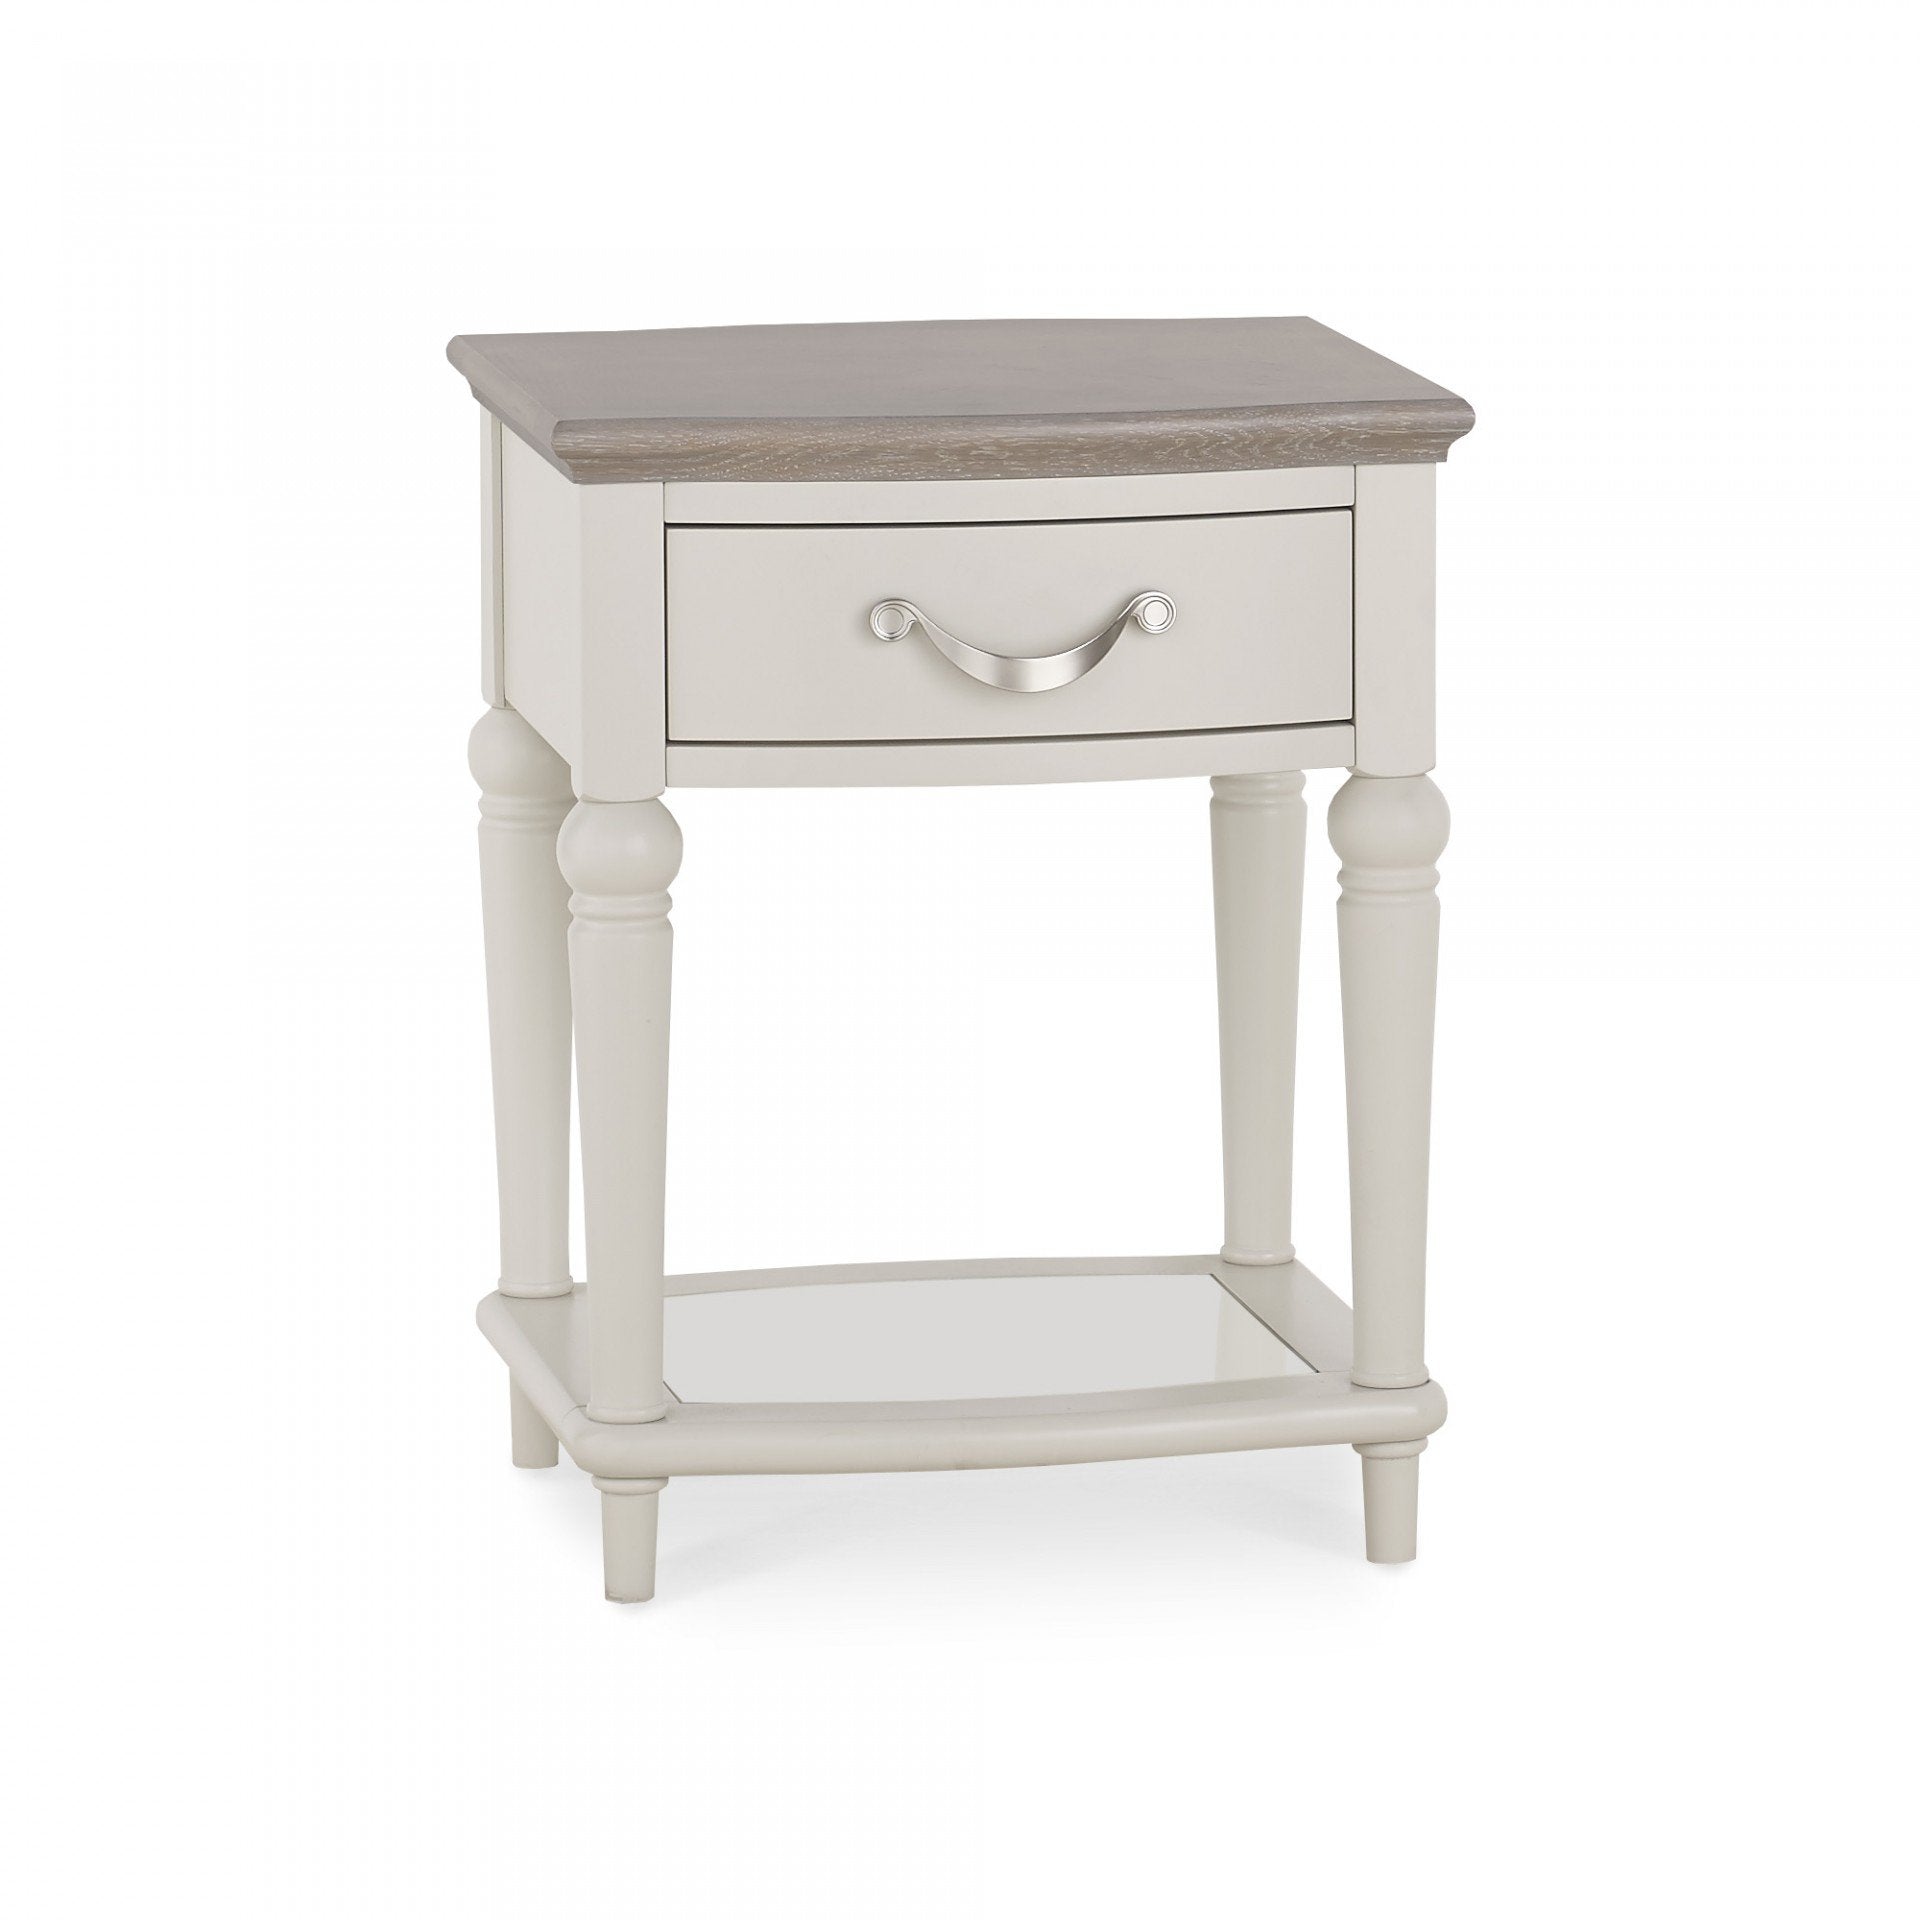 Montreux Grey Lamp Table from Upstairs Downstairs Furniture in Lisburn, Monaghan and Enniskillen